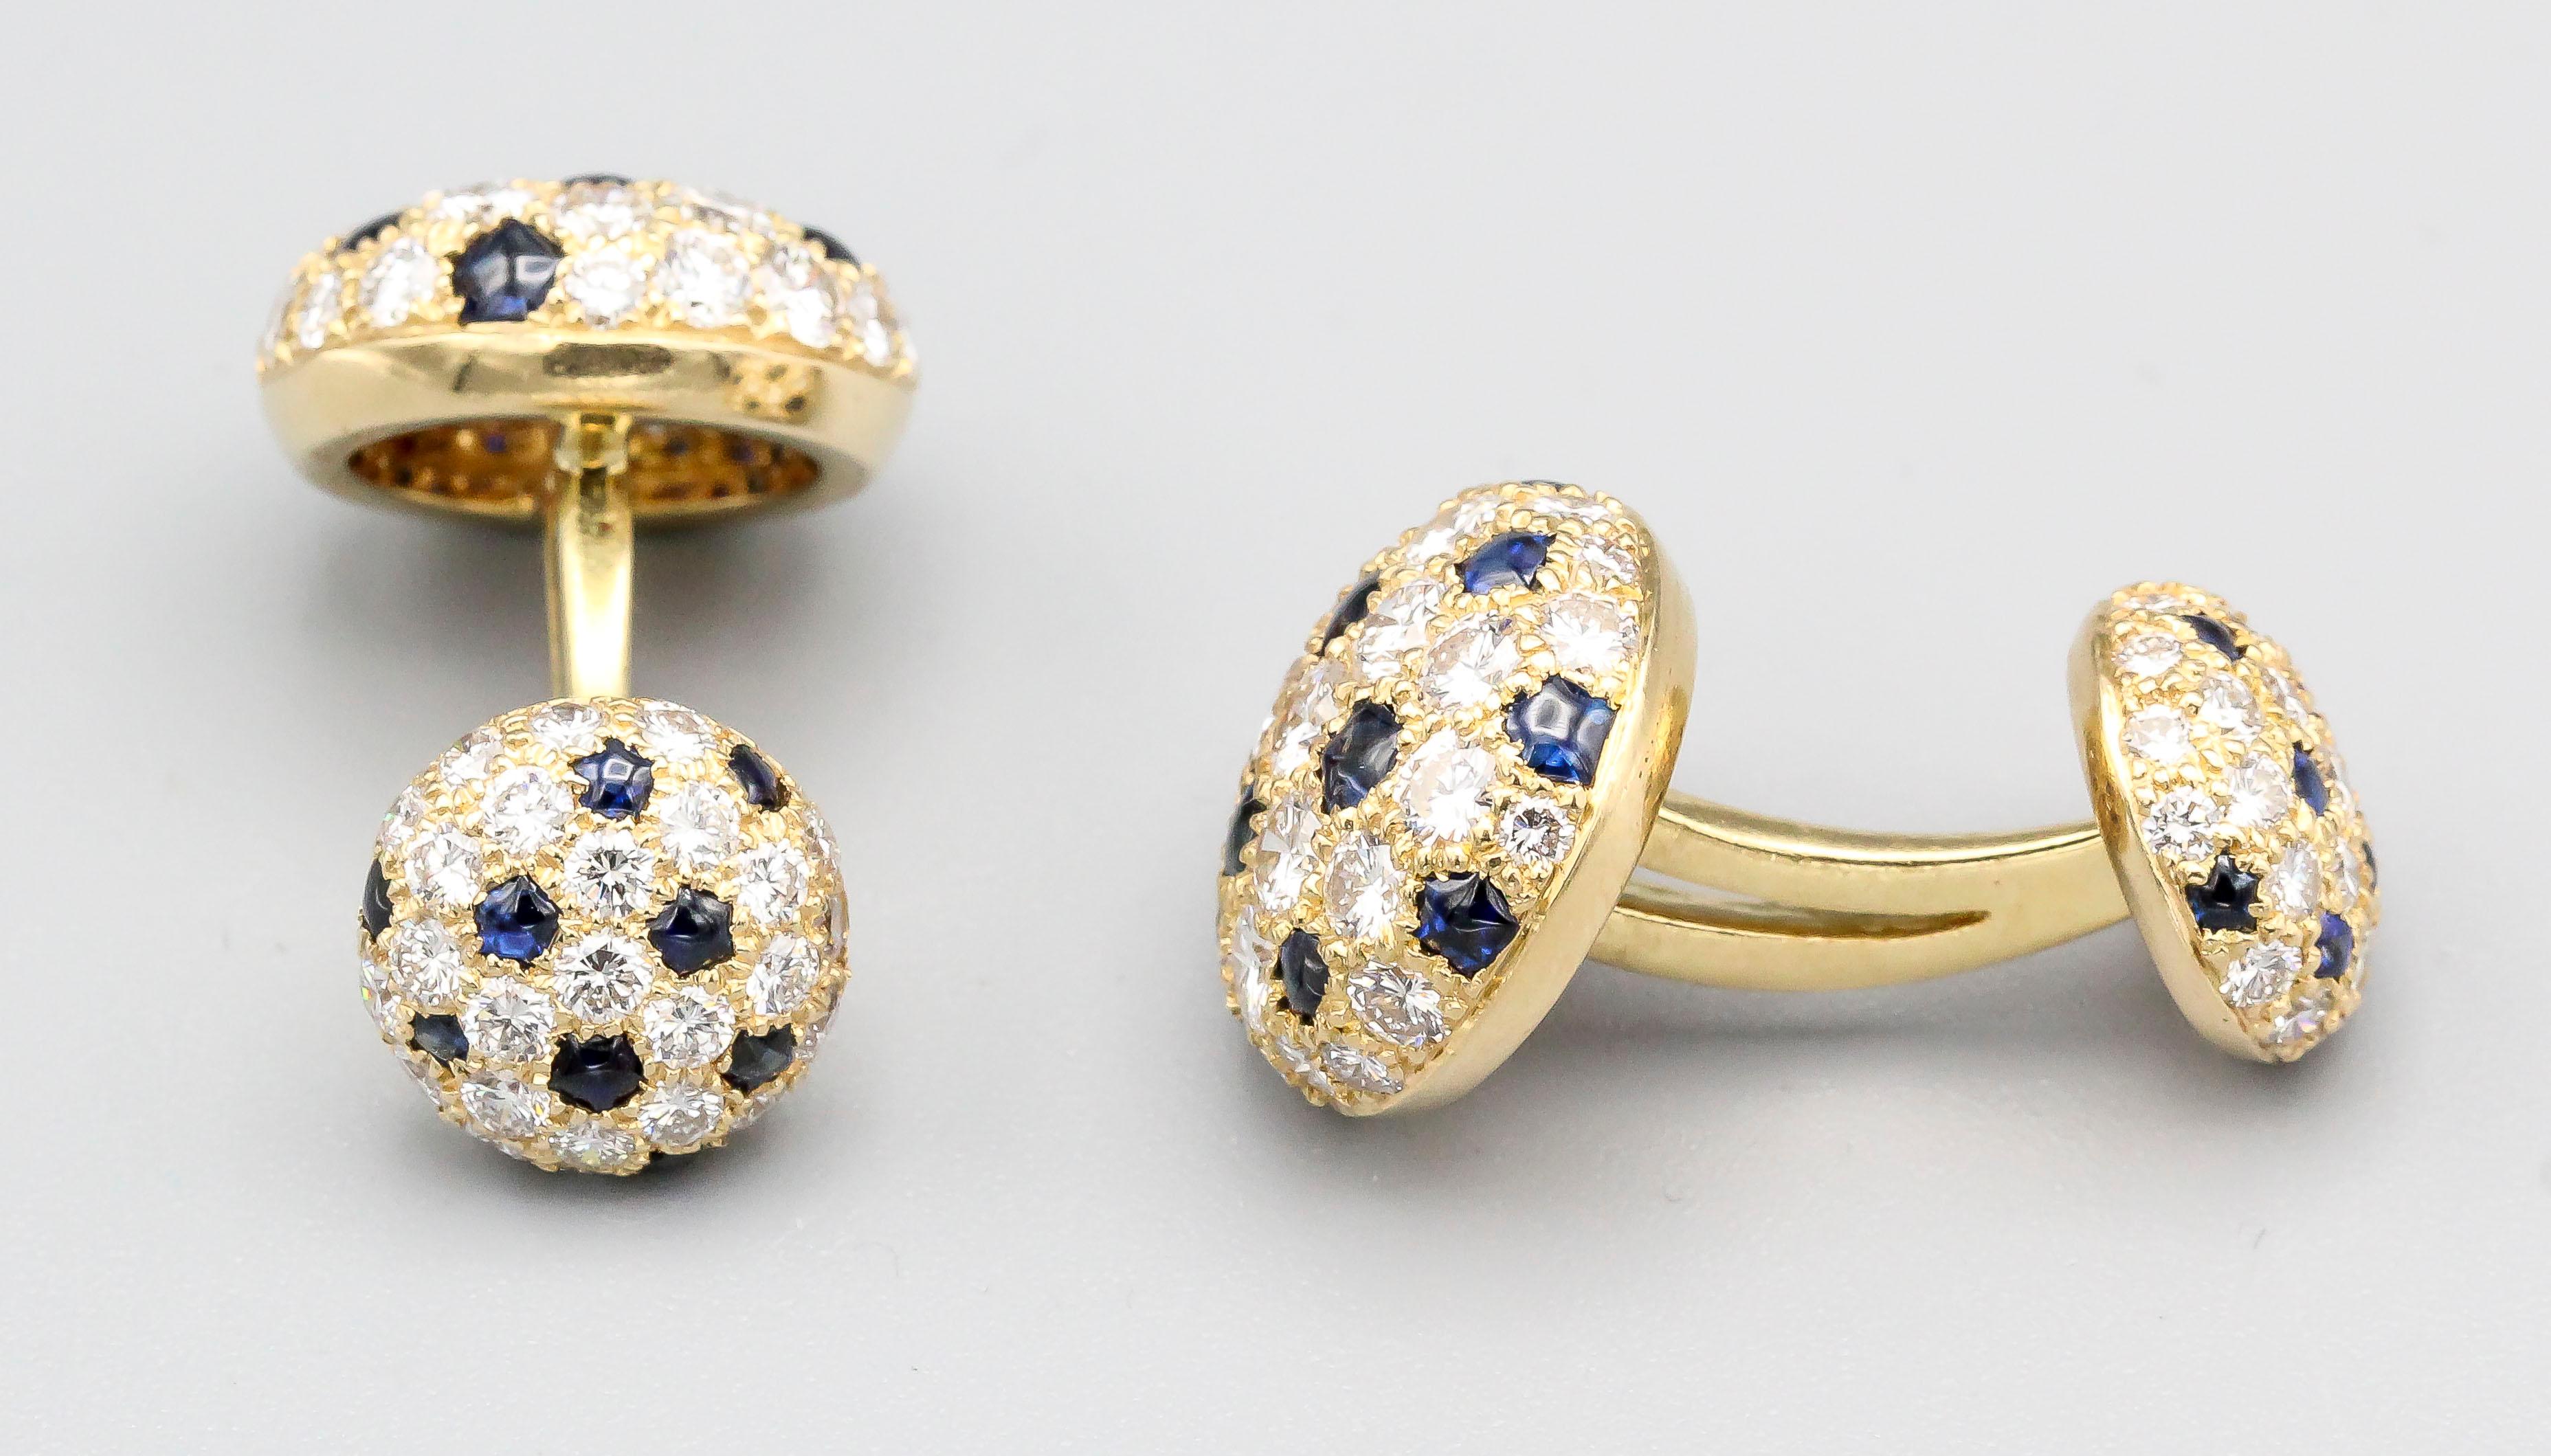 Elegant diamond, blue sapphire and 18K yellow gold button cufflinks from the Panthere collection, by Cartier . They feature high grade round brilliant cut diamonds as well as rich blue sapphires. Circa 1980s.

Hallmarks: Cartier, 750, reference